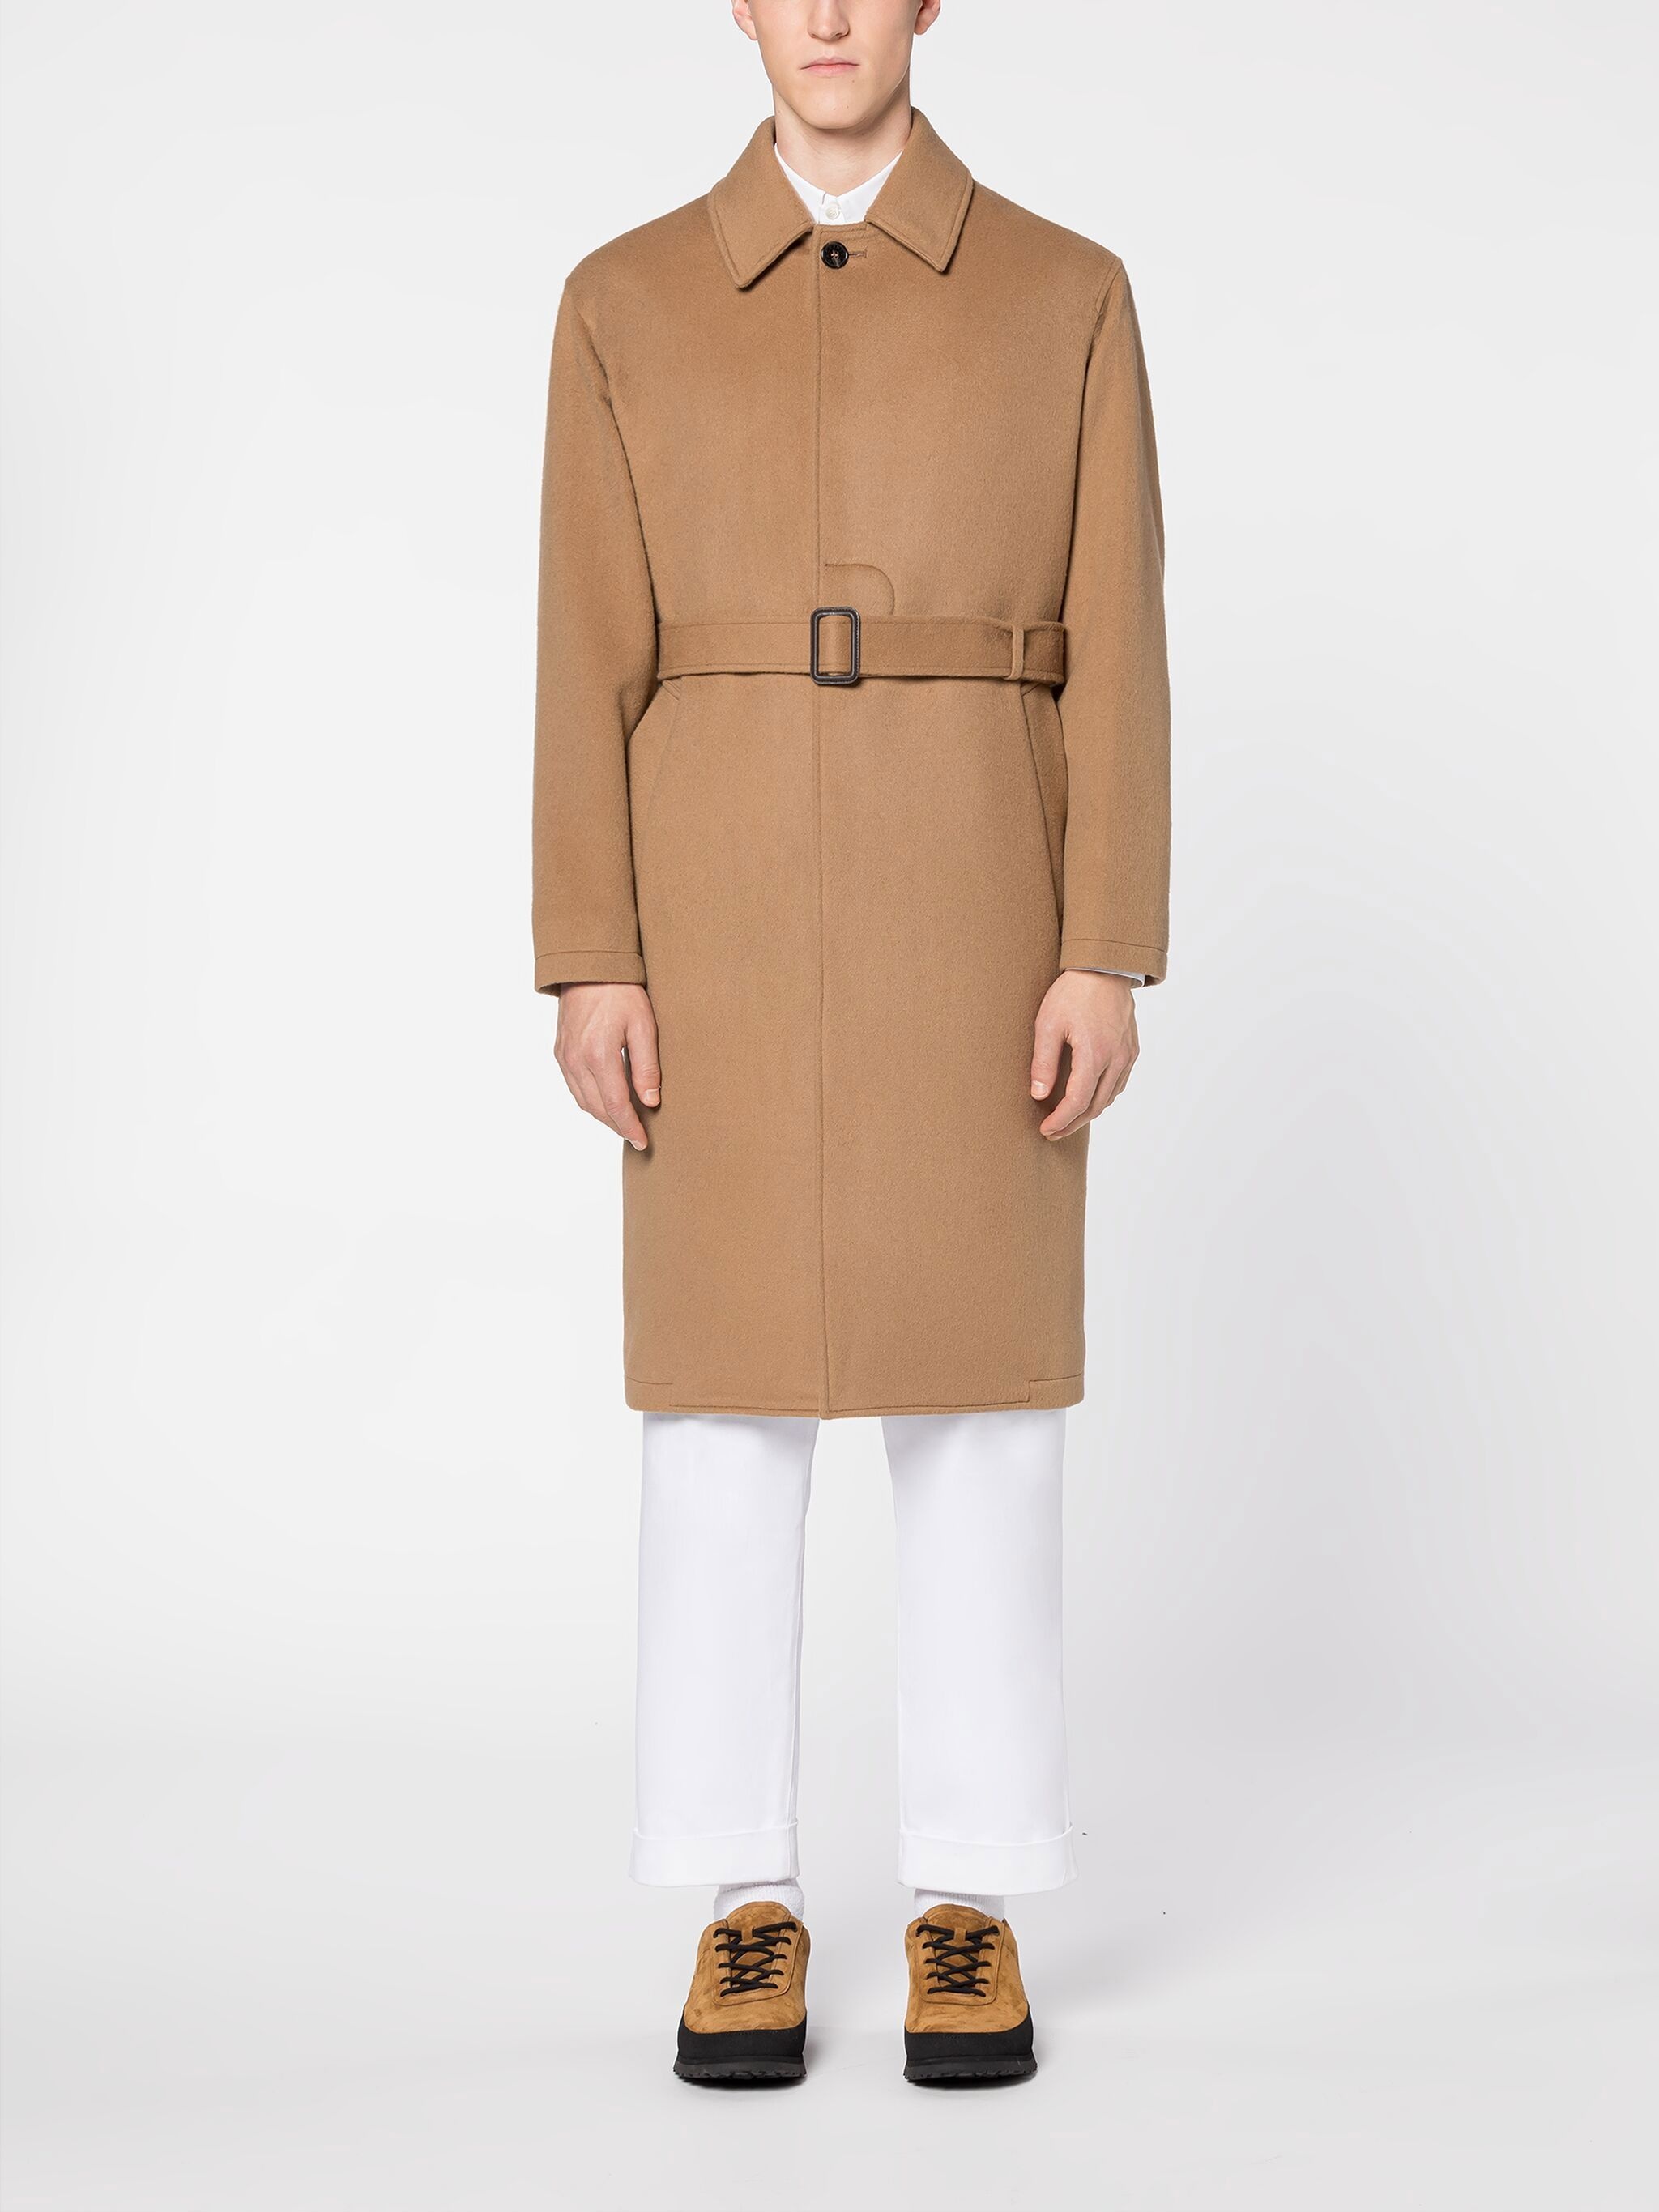 MILAN BEIGE WOOL & CASHMERE SINGLE-BREASTED TRENCH COAT - 2